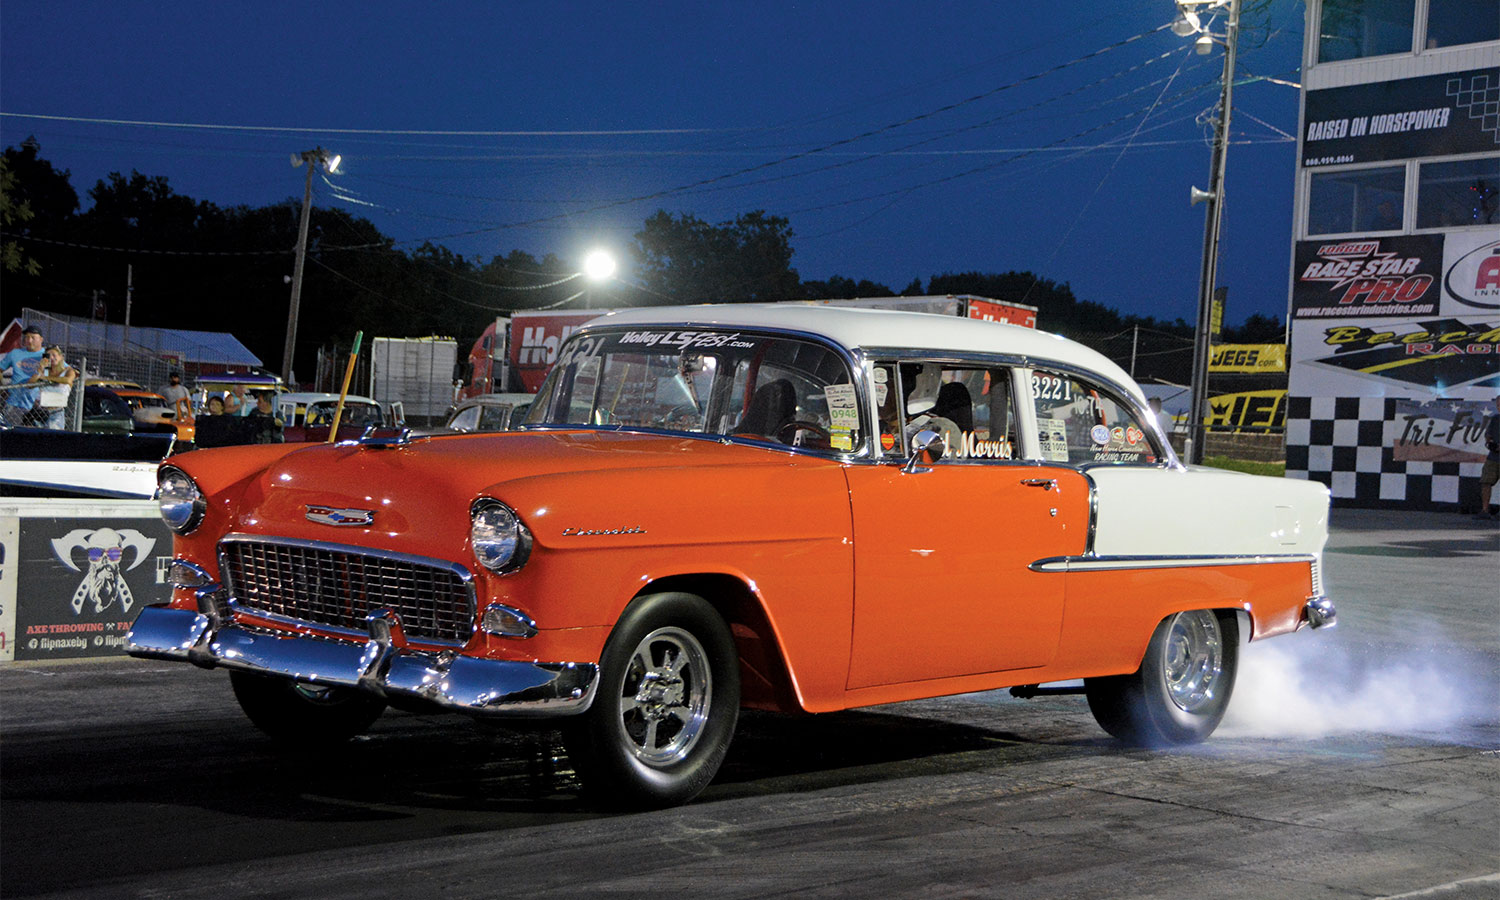 Orange and white chevy at a starting line at night